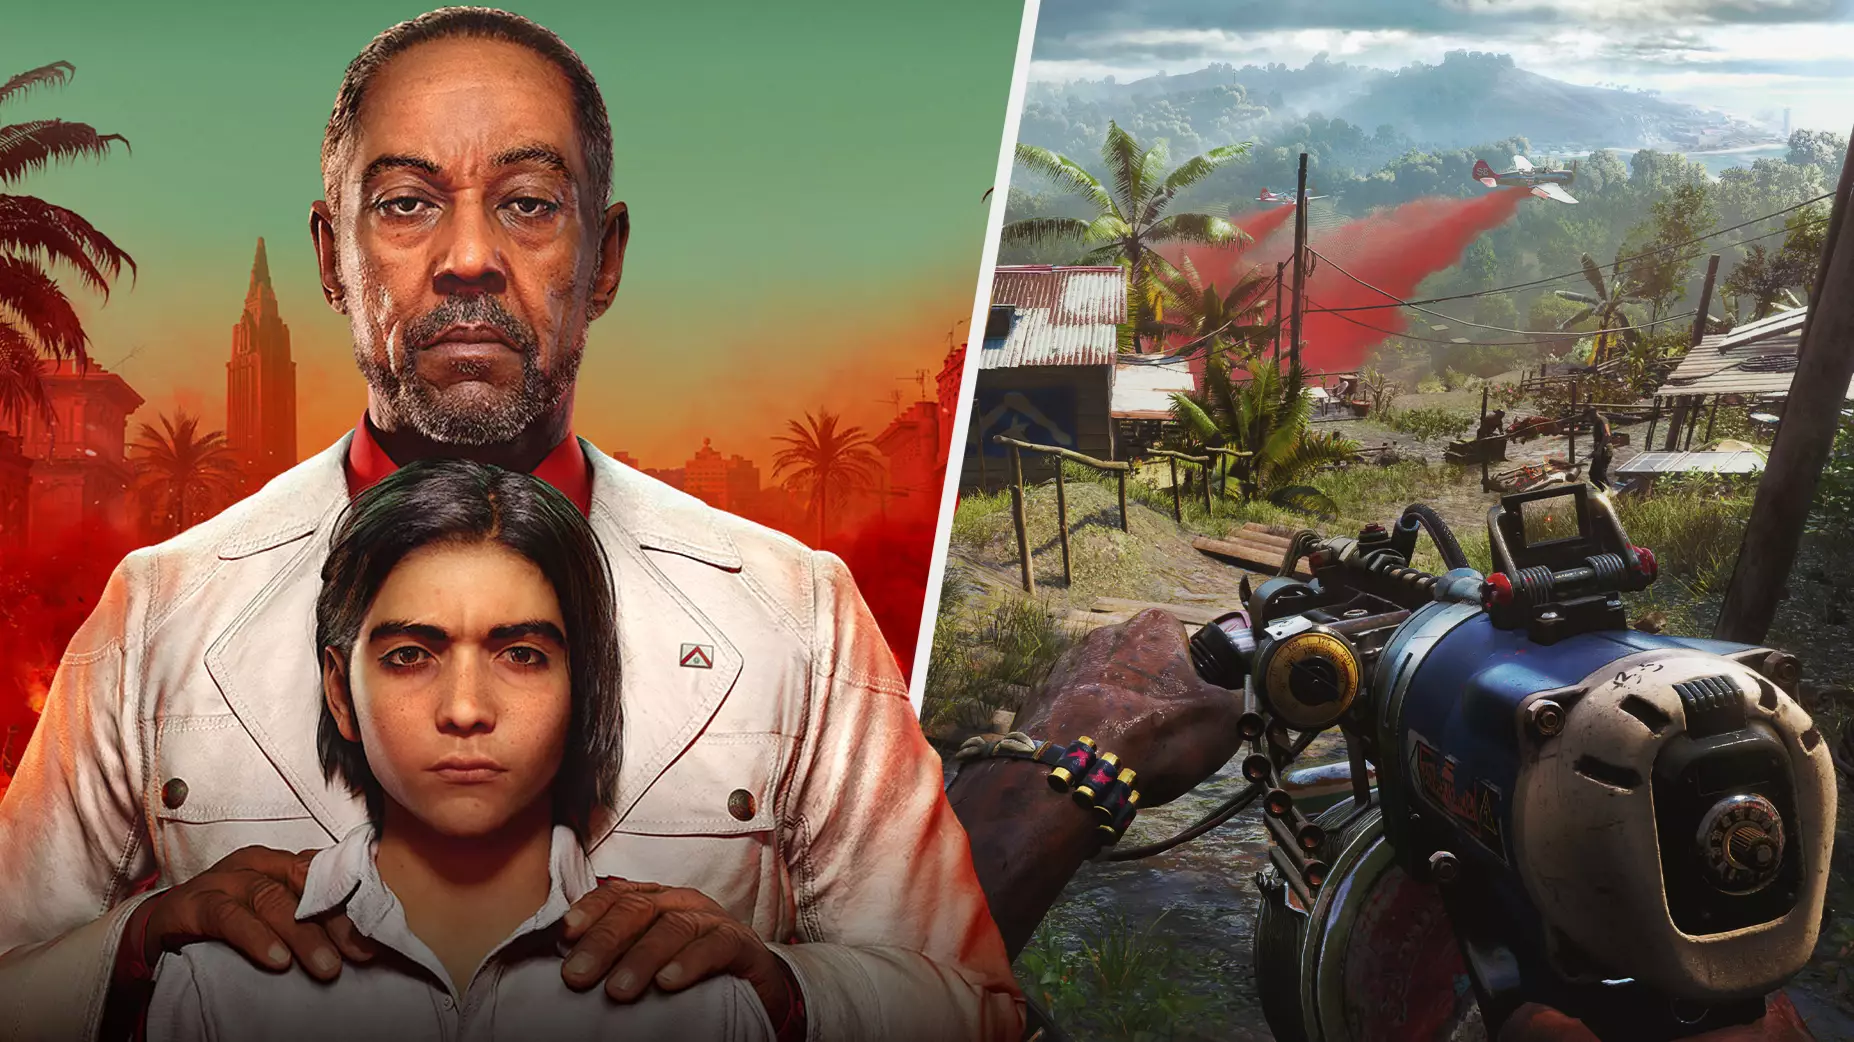 'Far Cry 6' May Launch Later Than We Expected, According To This Leak